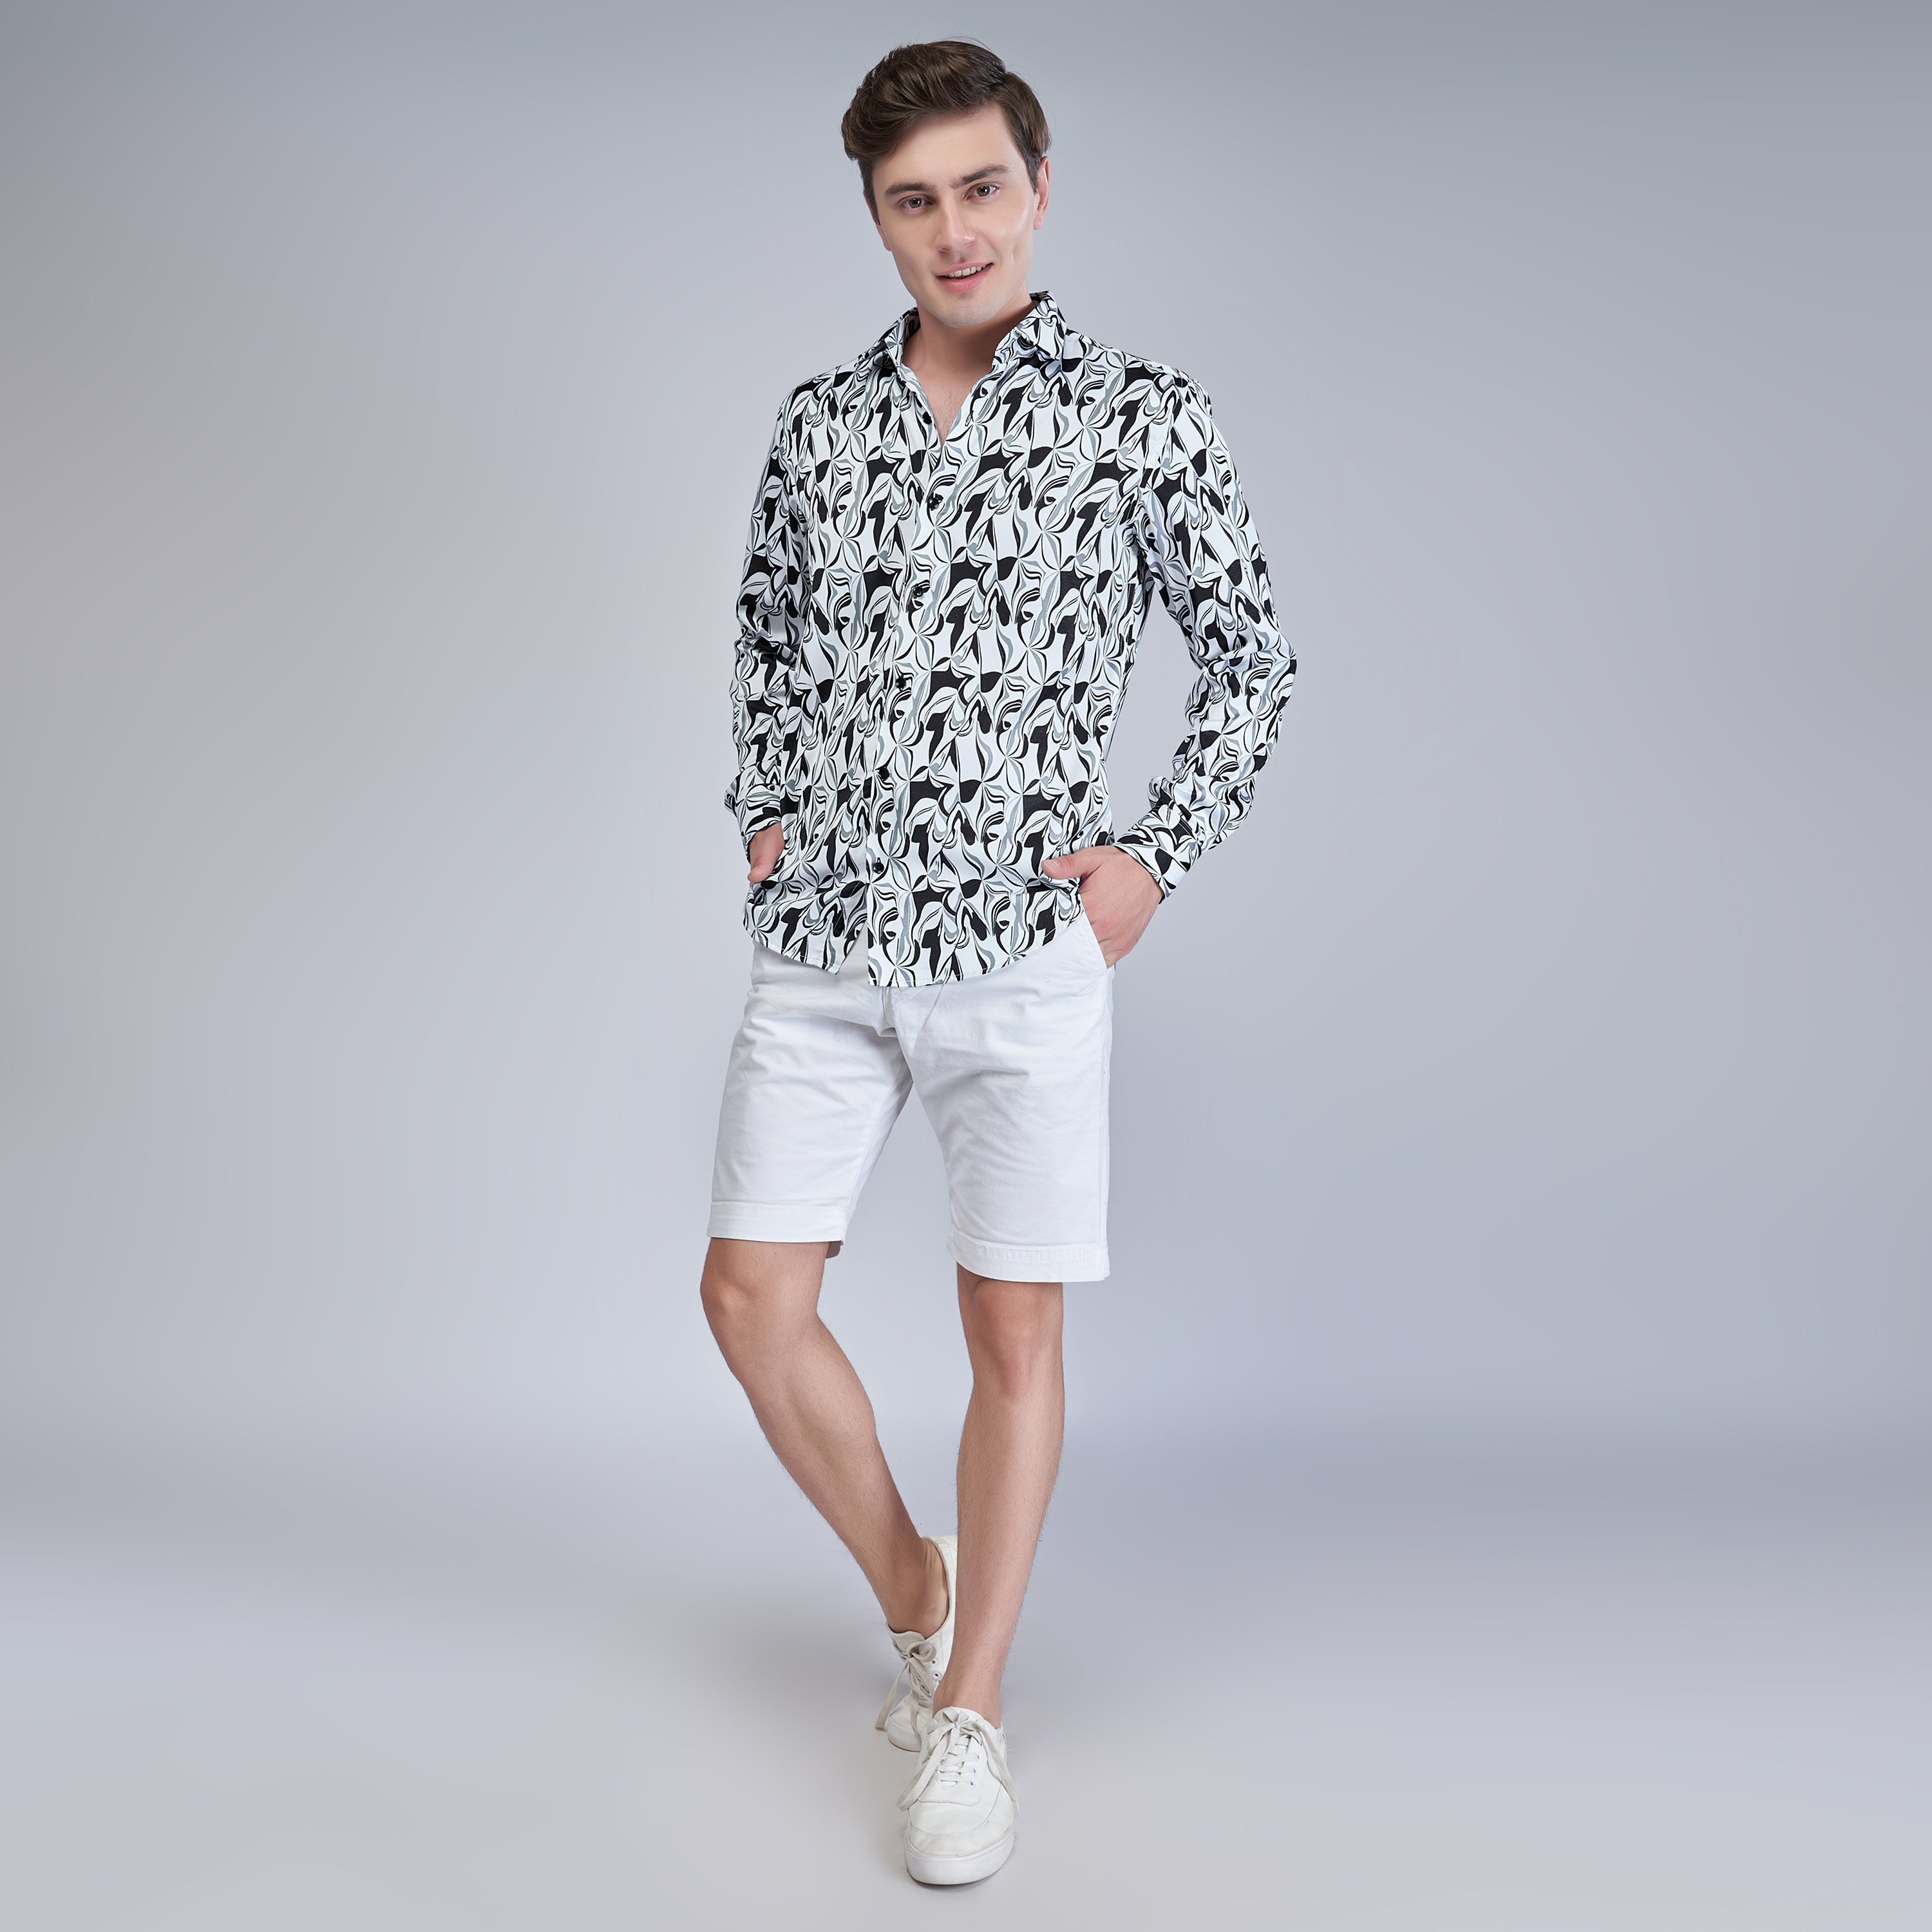 Men's Vacation Outfits